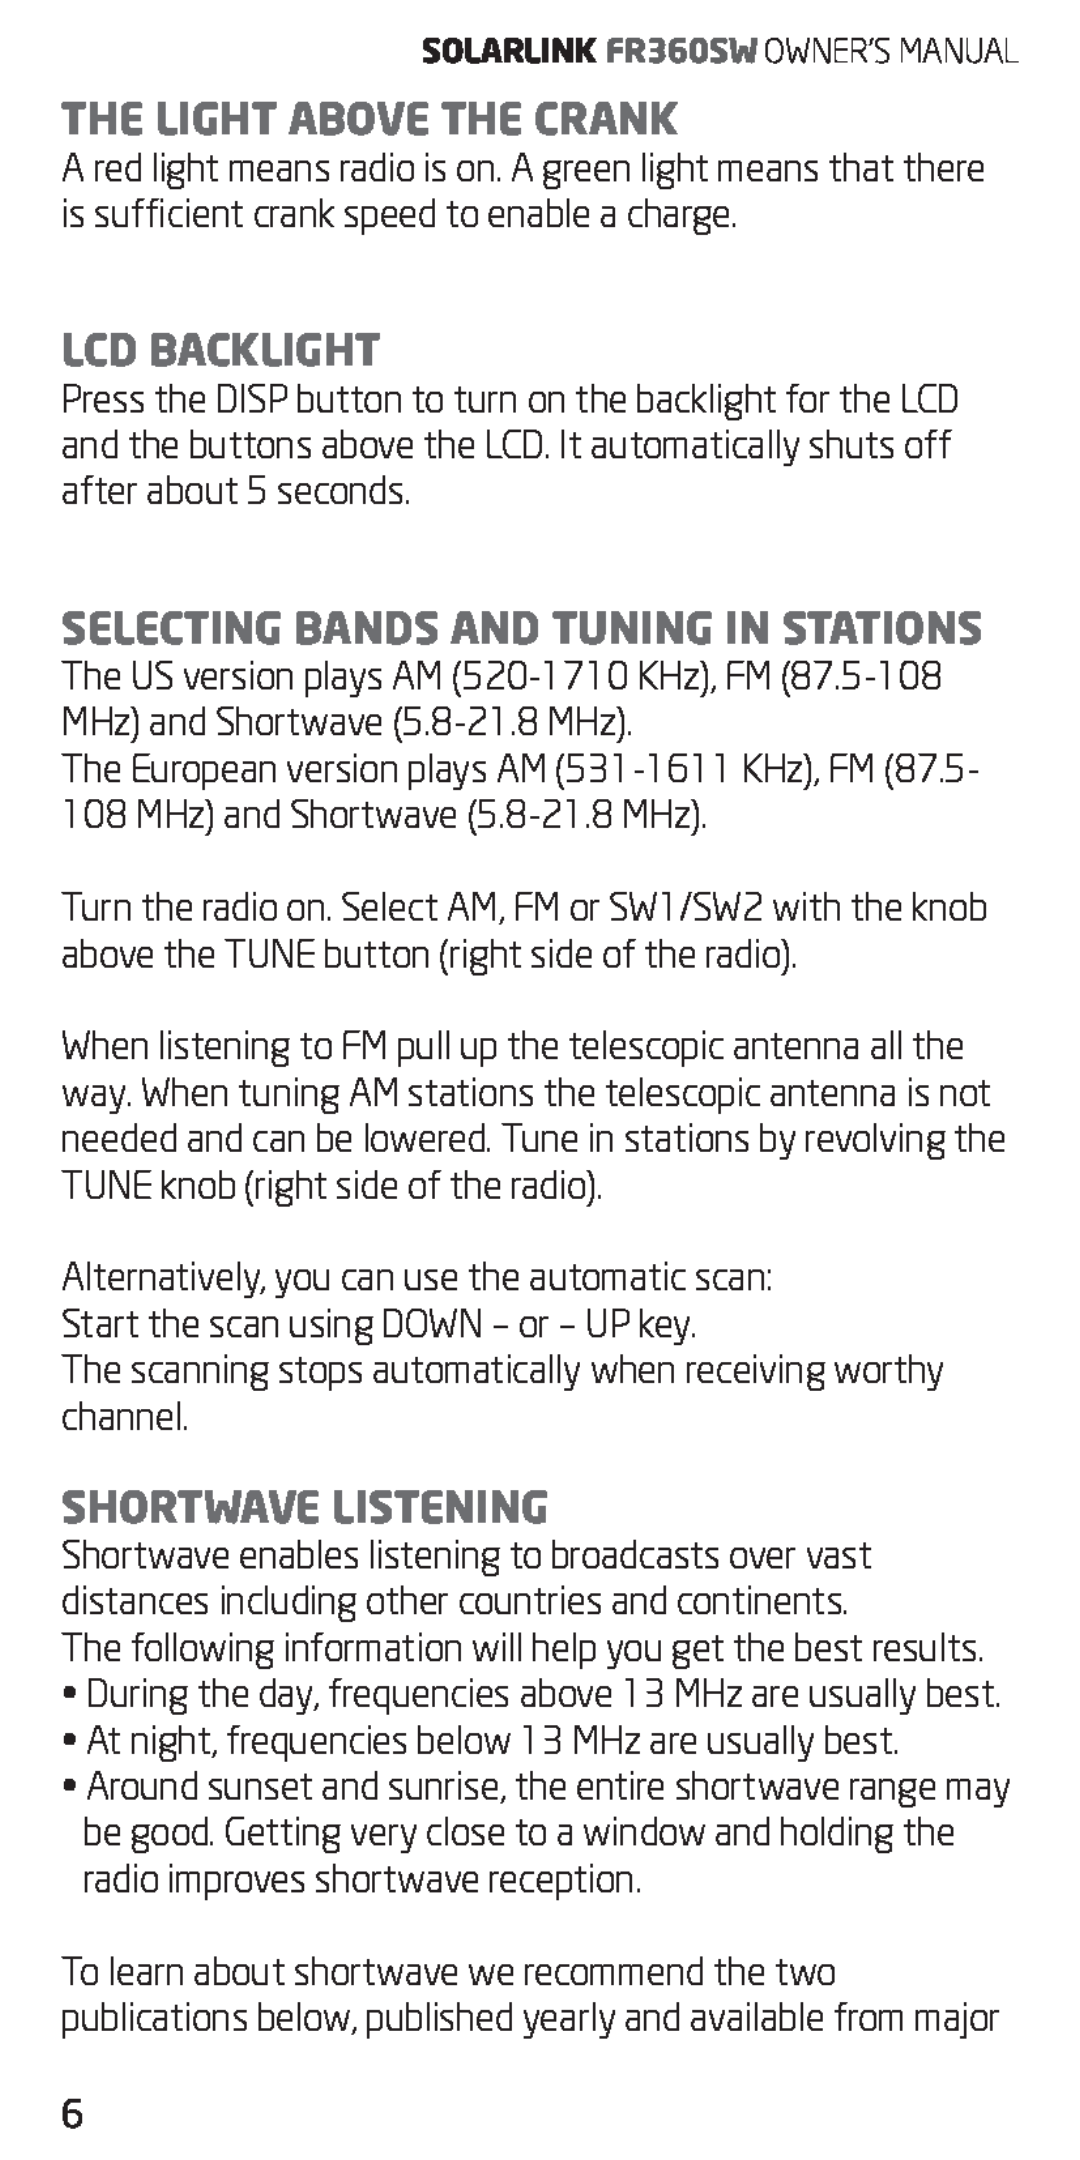 Eton FR360 The Light Above The Crank, Lcd Backlight, Selecting Bands And Tuning In Stations, Shortwave Listening 